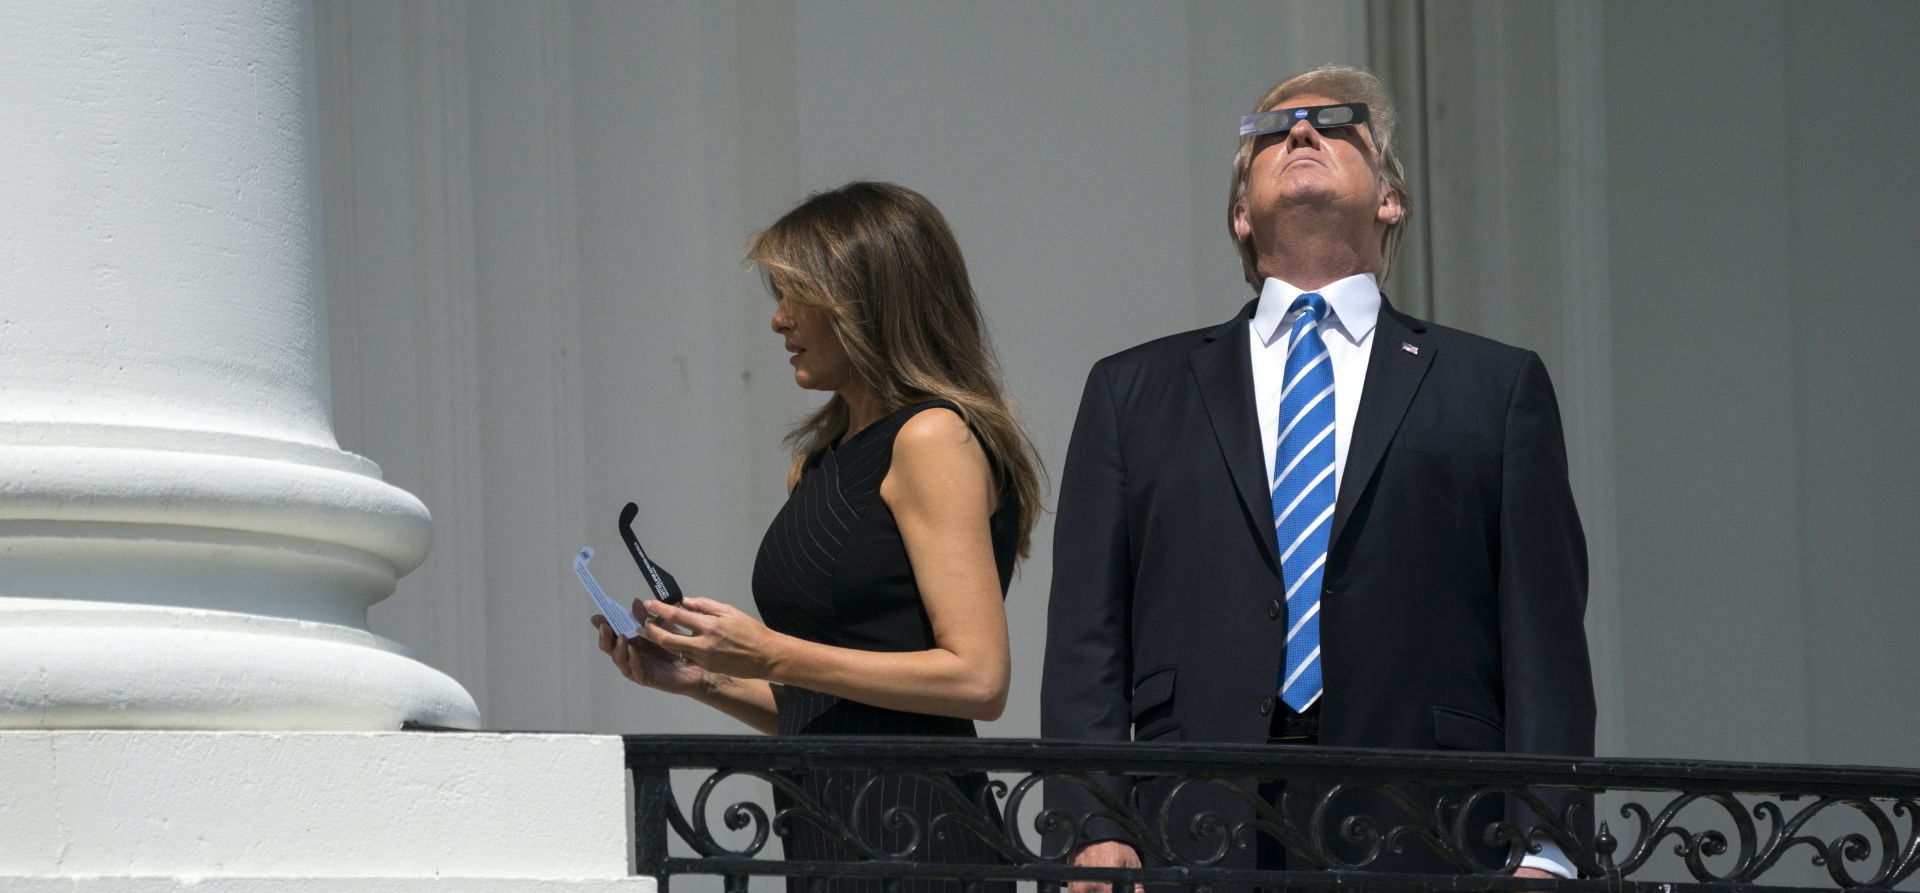 epa06155377 US President Donald J. Trump (R) and First Lady Melania Trump (L) view the solar eclipse from a balcony of the White House in Washington, DC, USA, 21 August 2017. The 21 August 2017 total solar eclipse will last a maximum of 2 minutes 43 seconds and the thin path of totality will pass through portions of 14 US states, according to the National Aeronautics and Space Administration (NASA).  EPA/SHAWN THEW